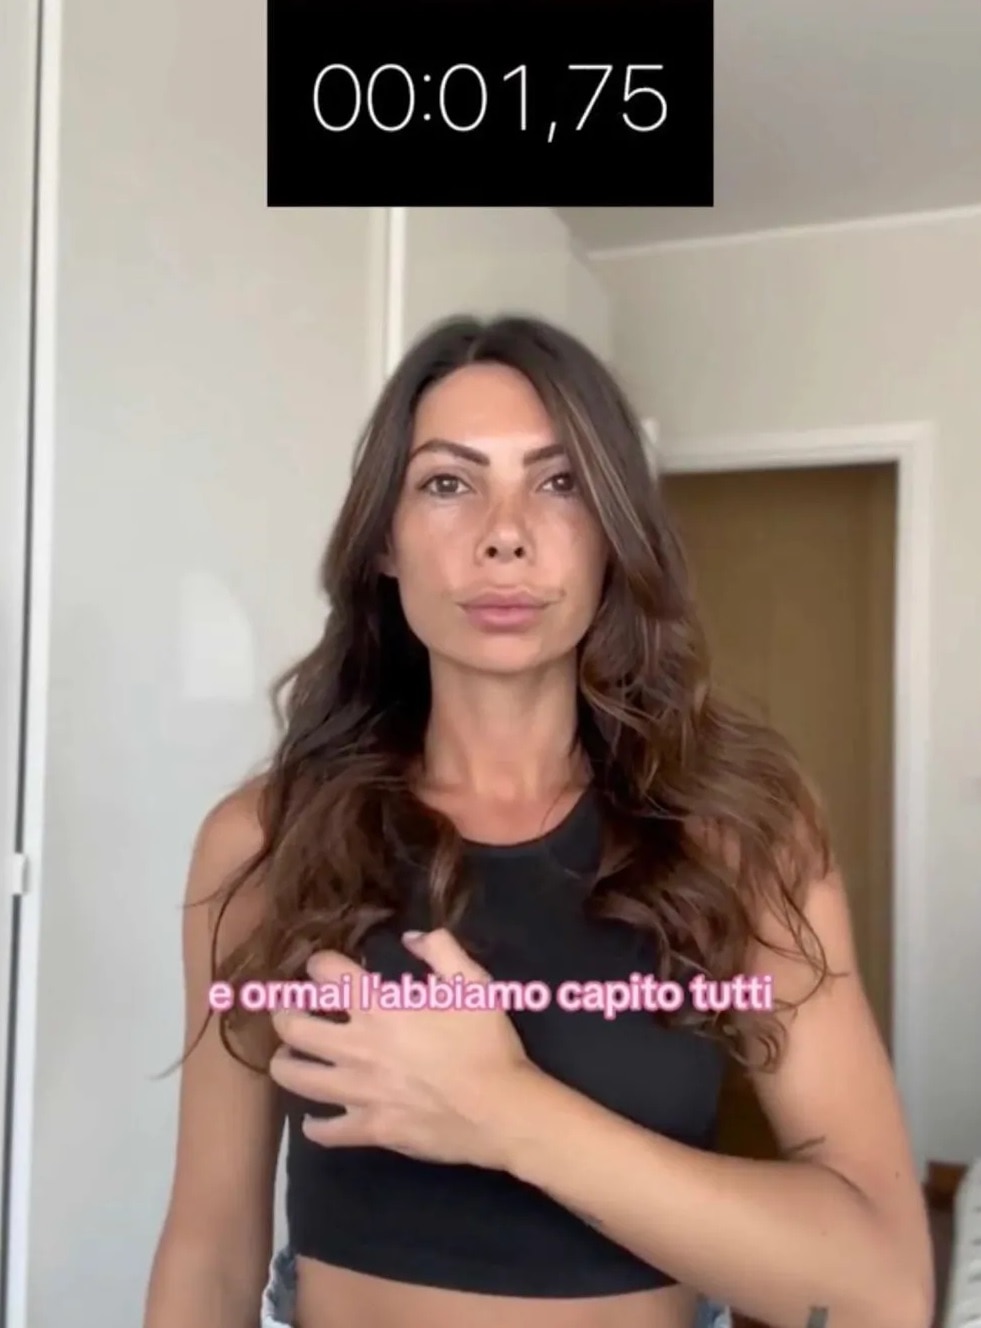 Italians Grope Themselves Photos Videos Goes Viral